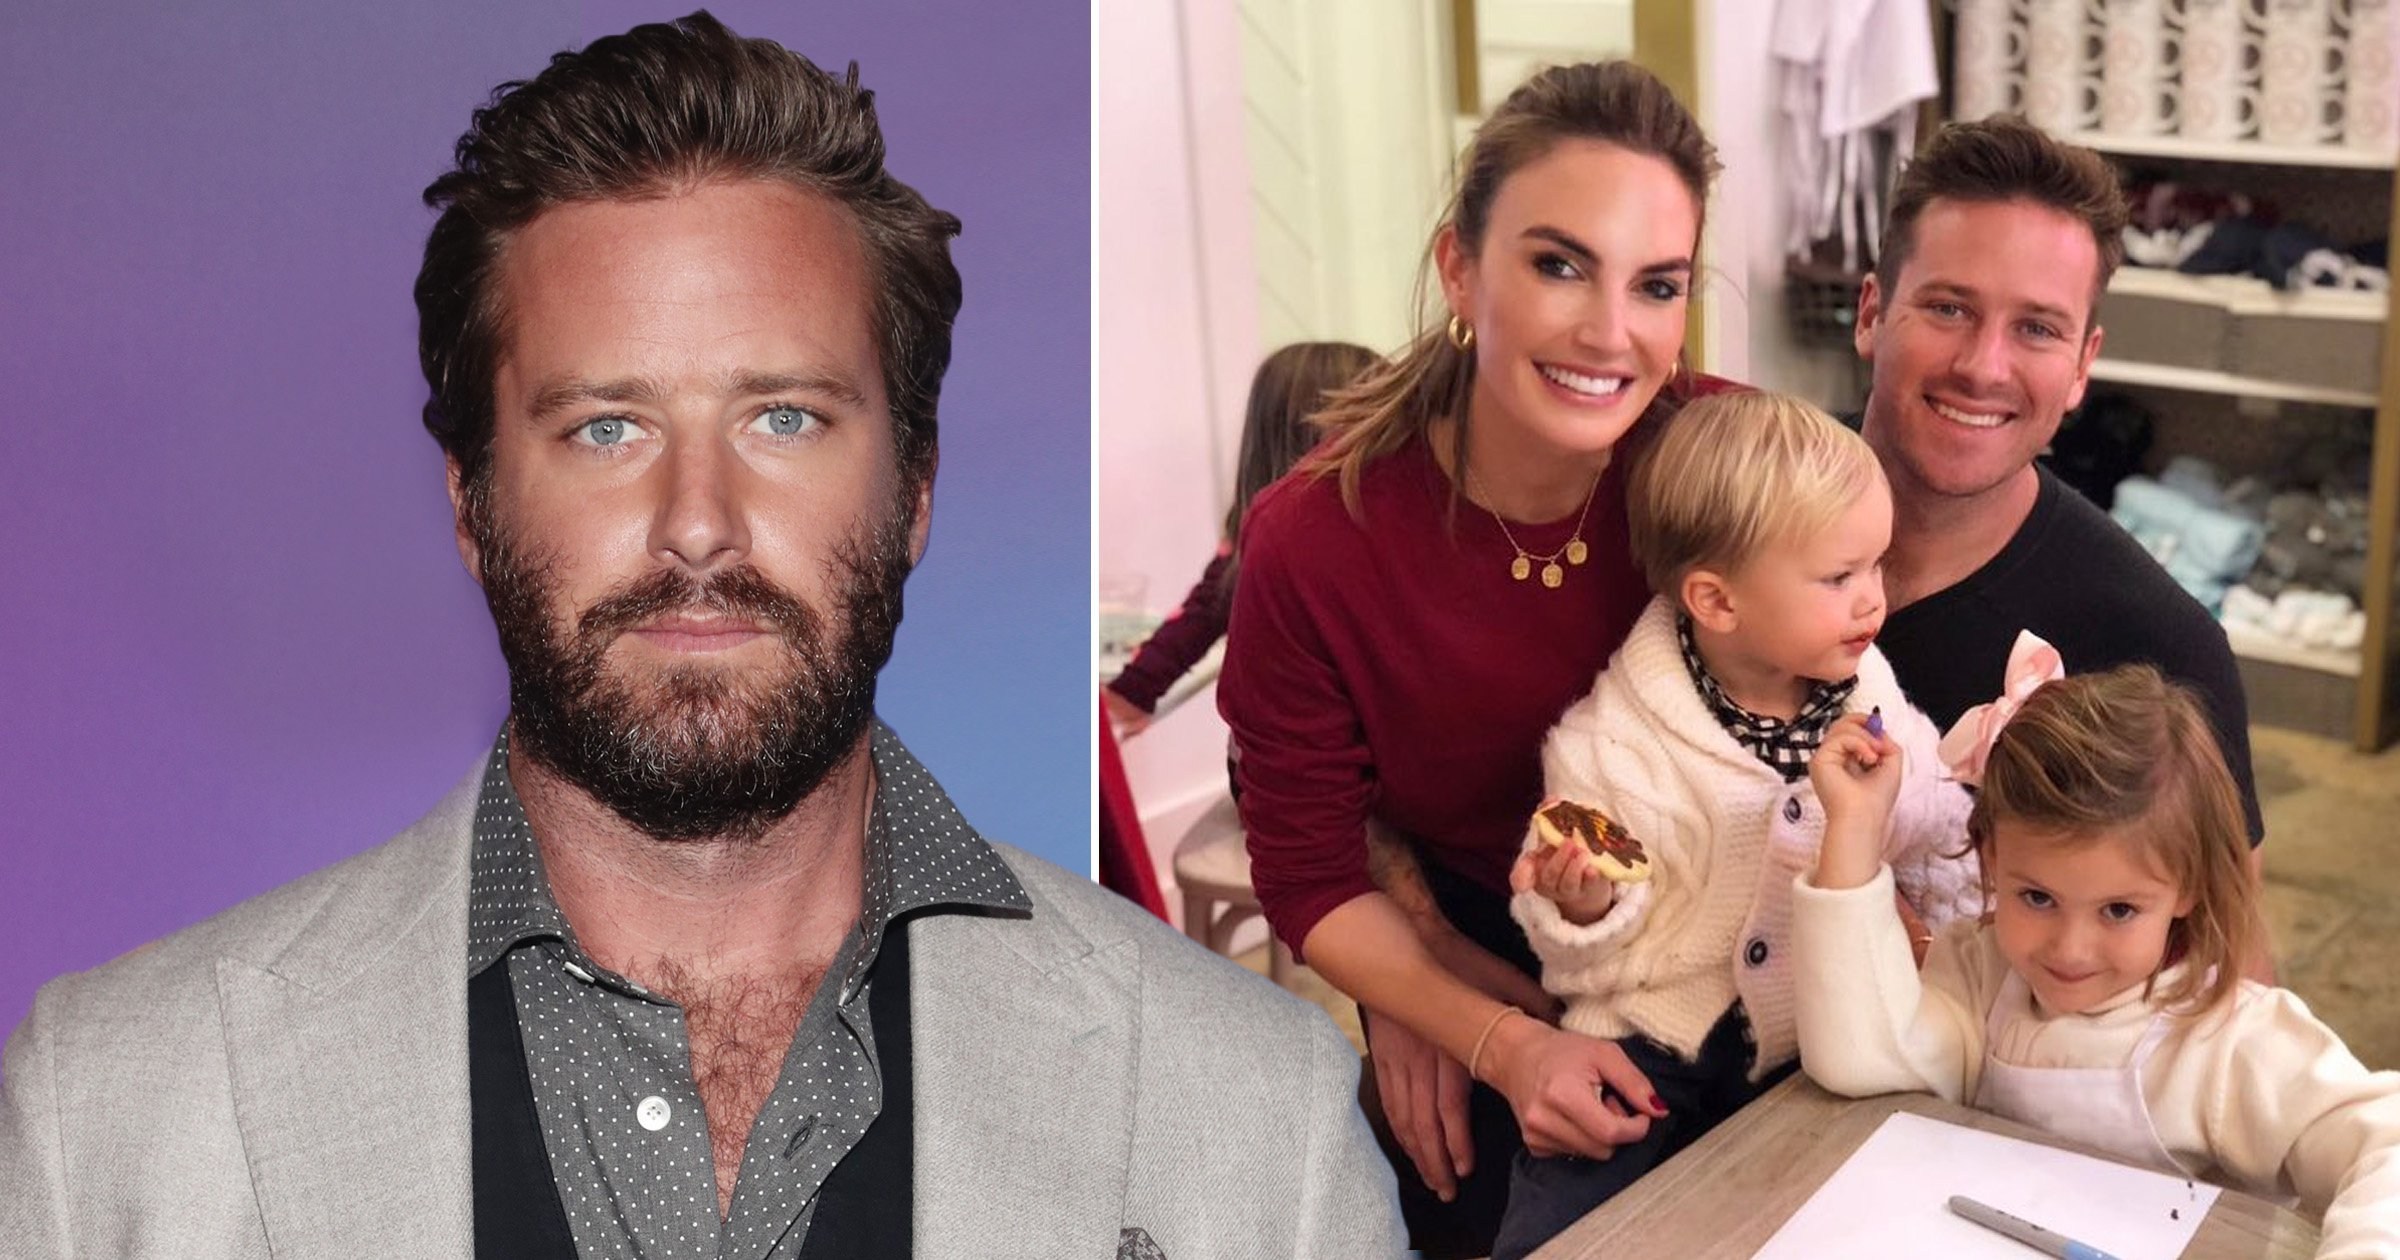 Who is Armie Hammer’s ex-wife and do they have any children?